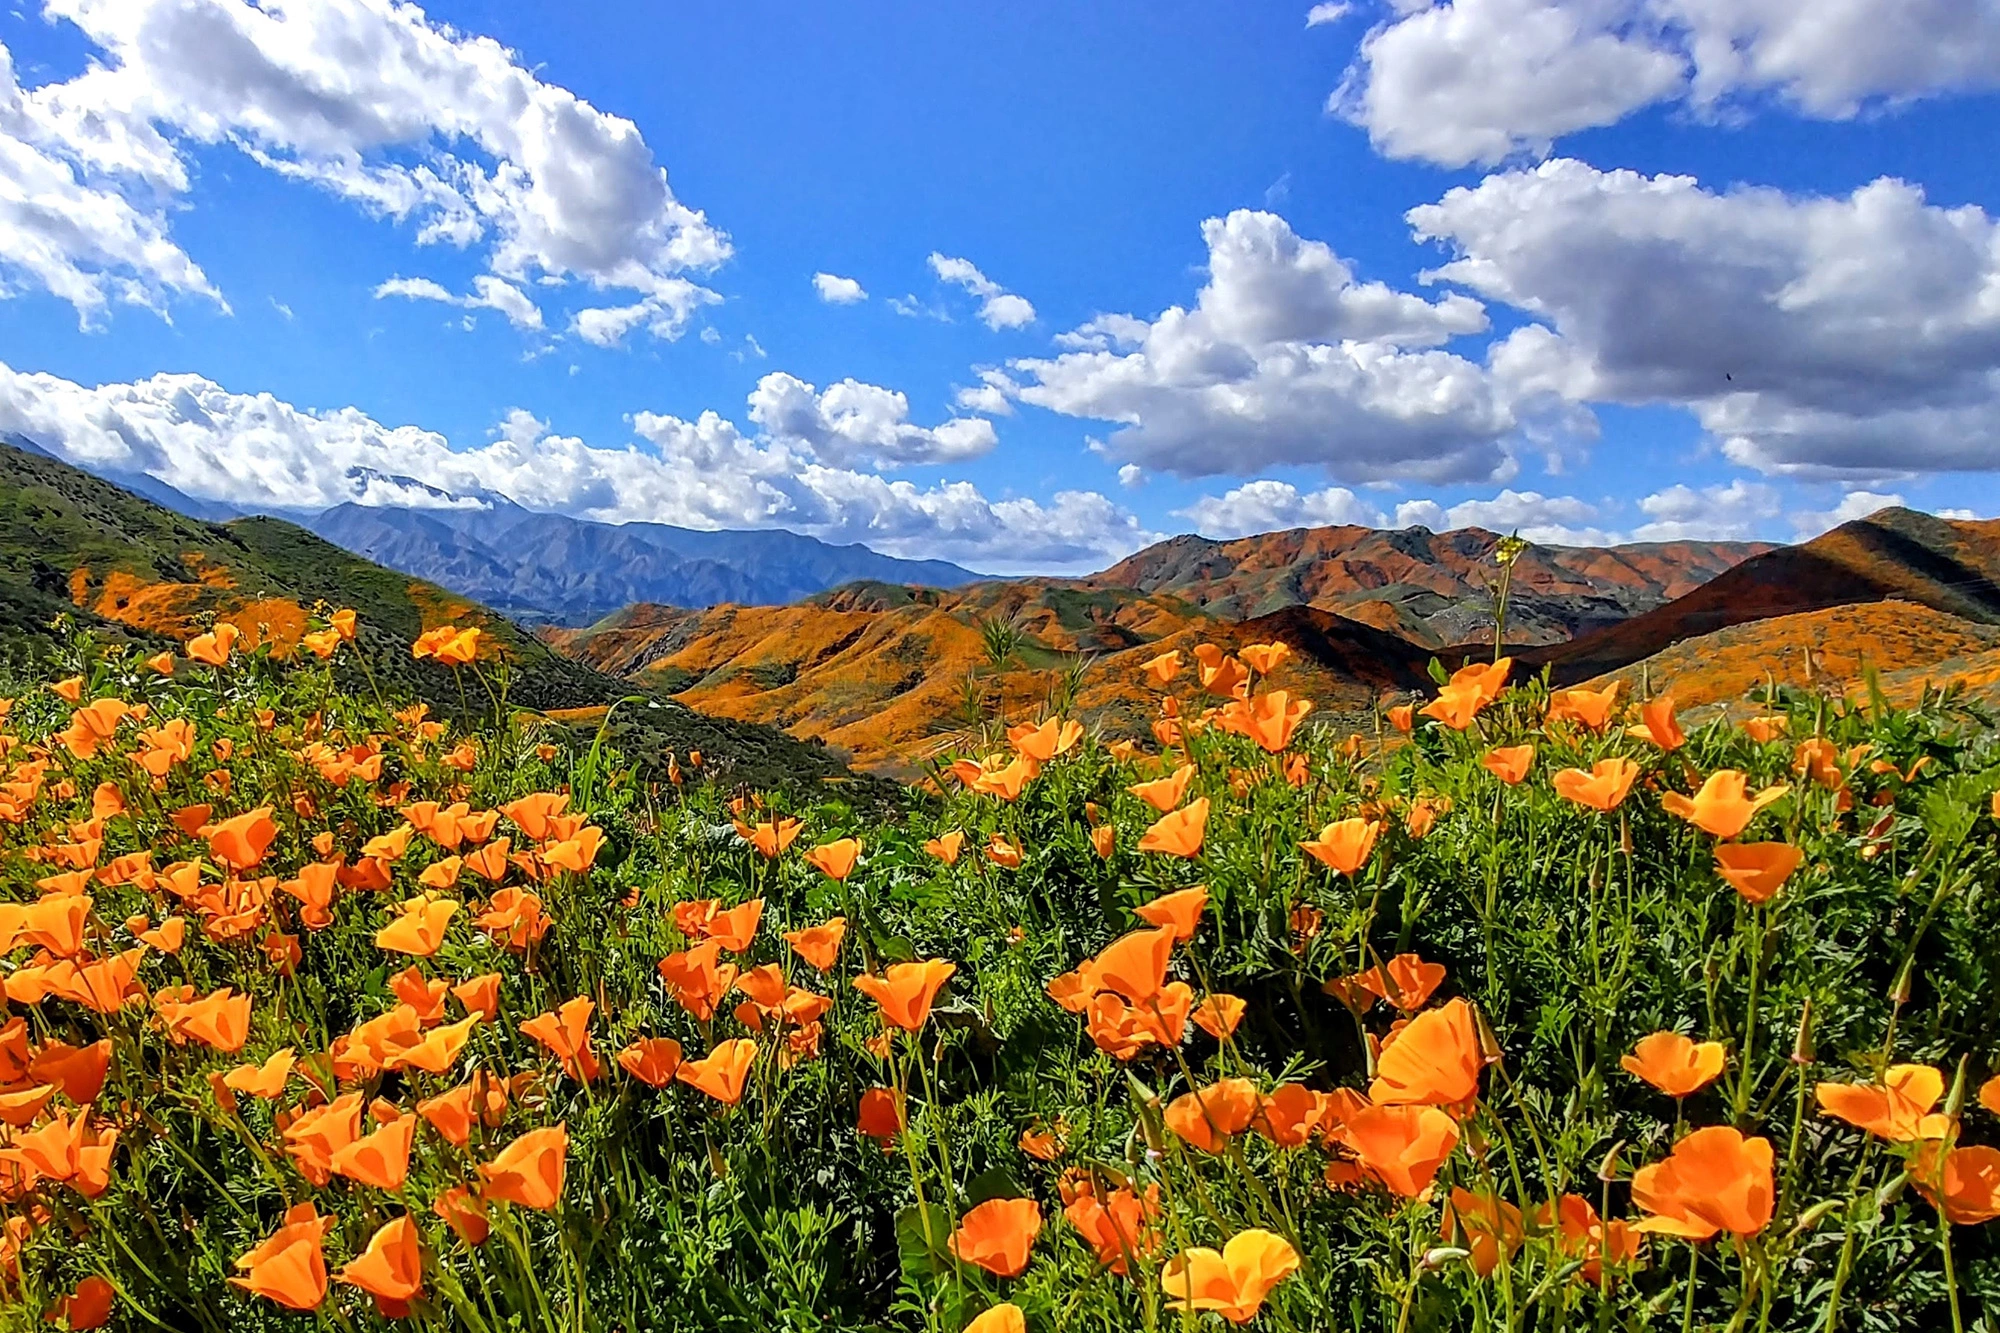 flowers in the California mountains